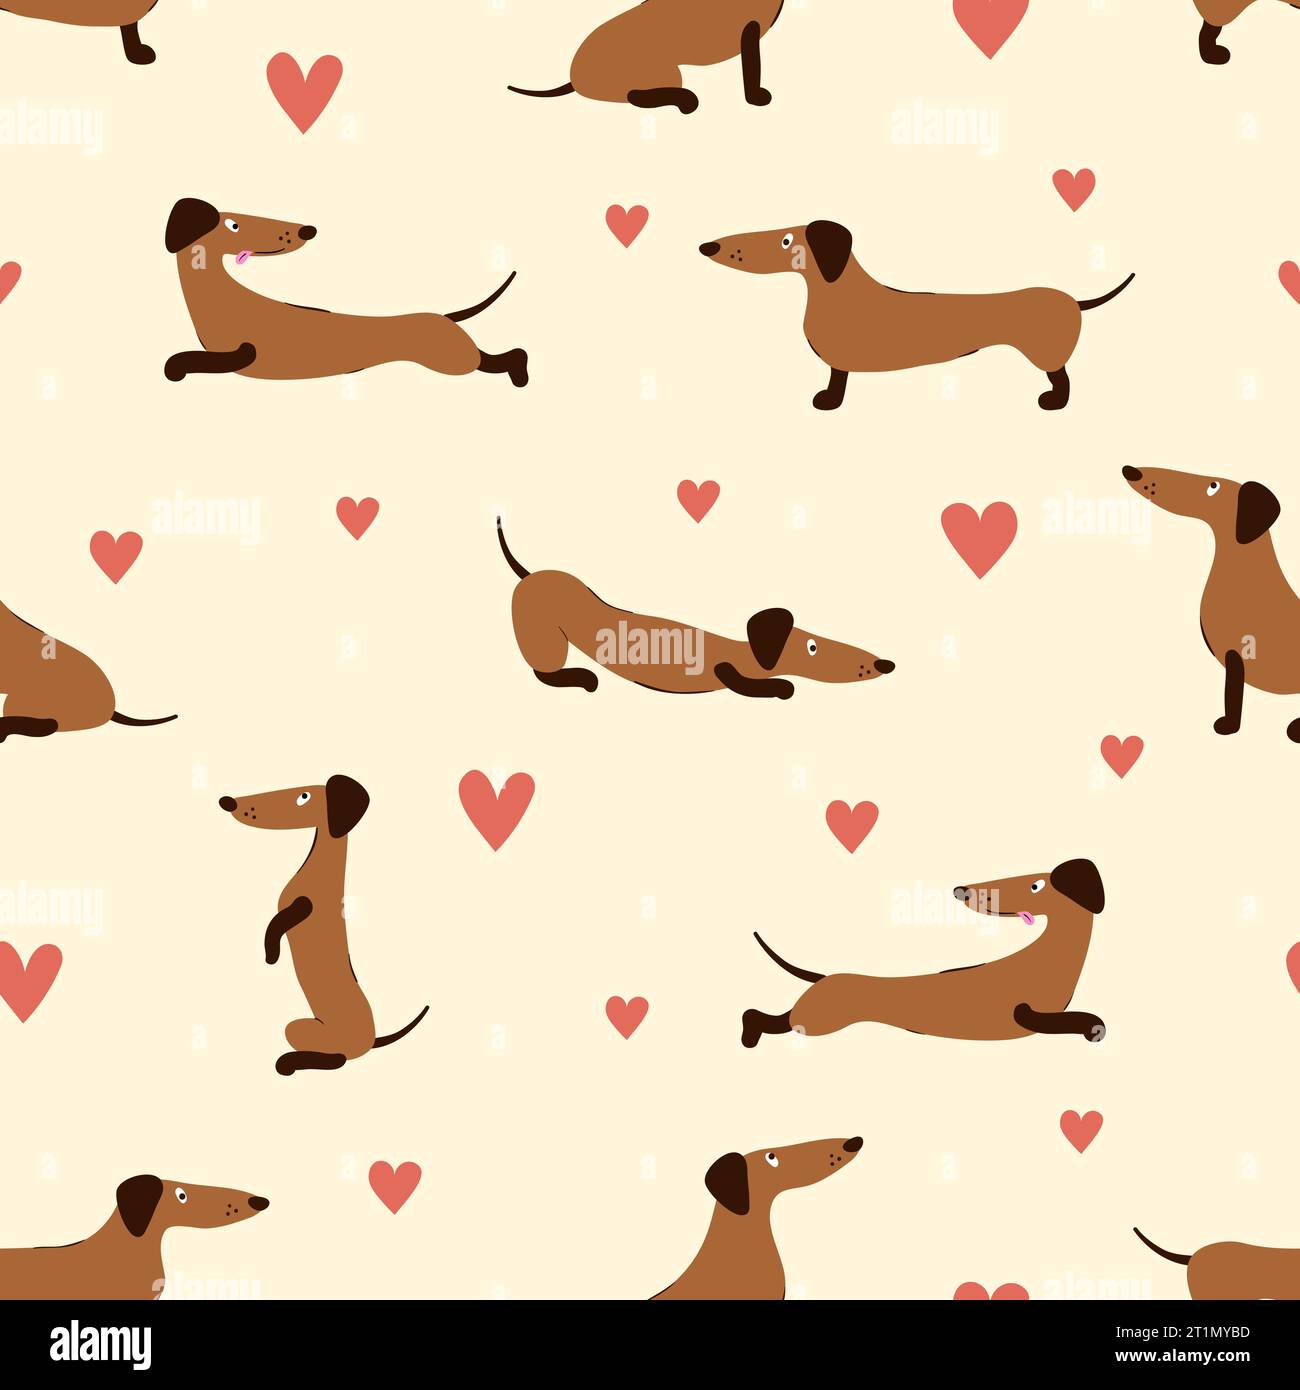 Seamless pattern with cute cartoon dachshunds and hearts. Vector dog illustration Stock Vector